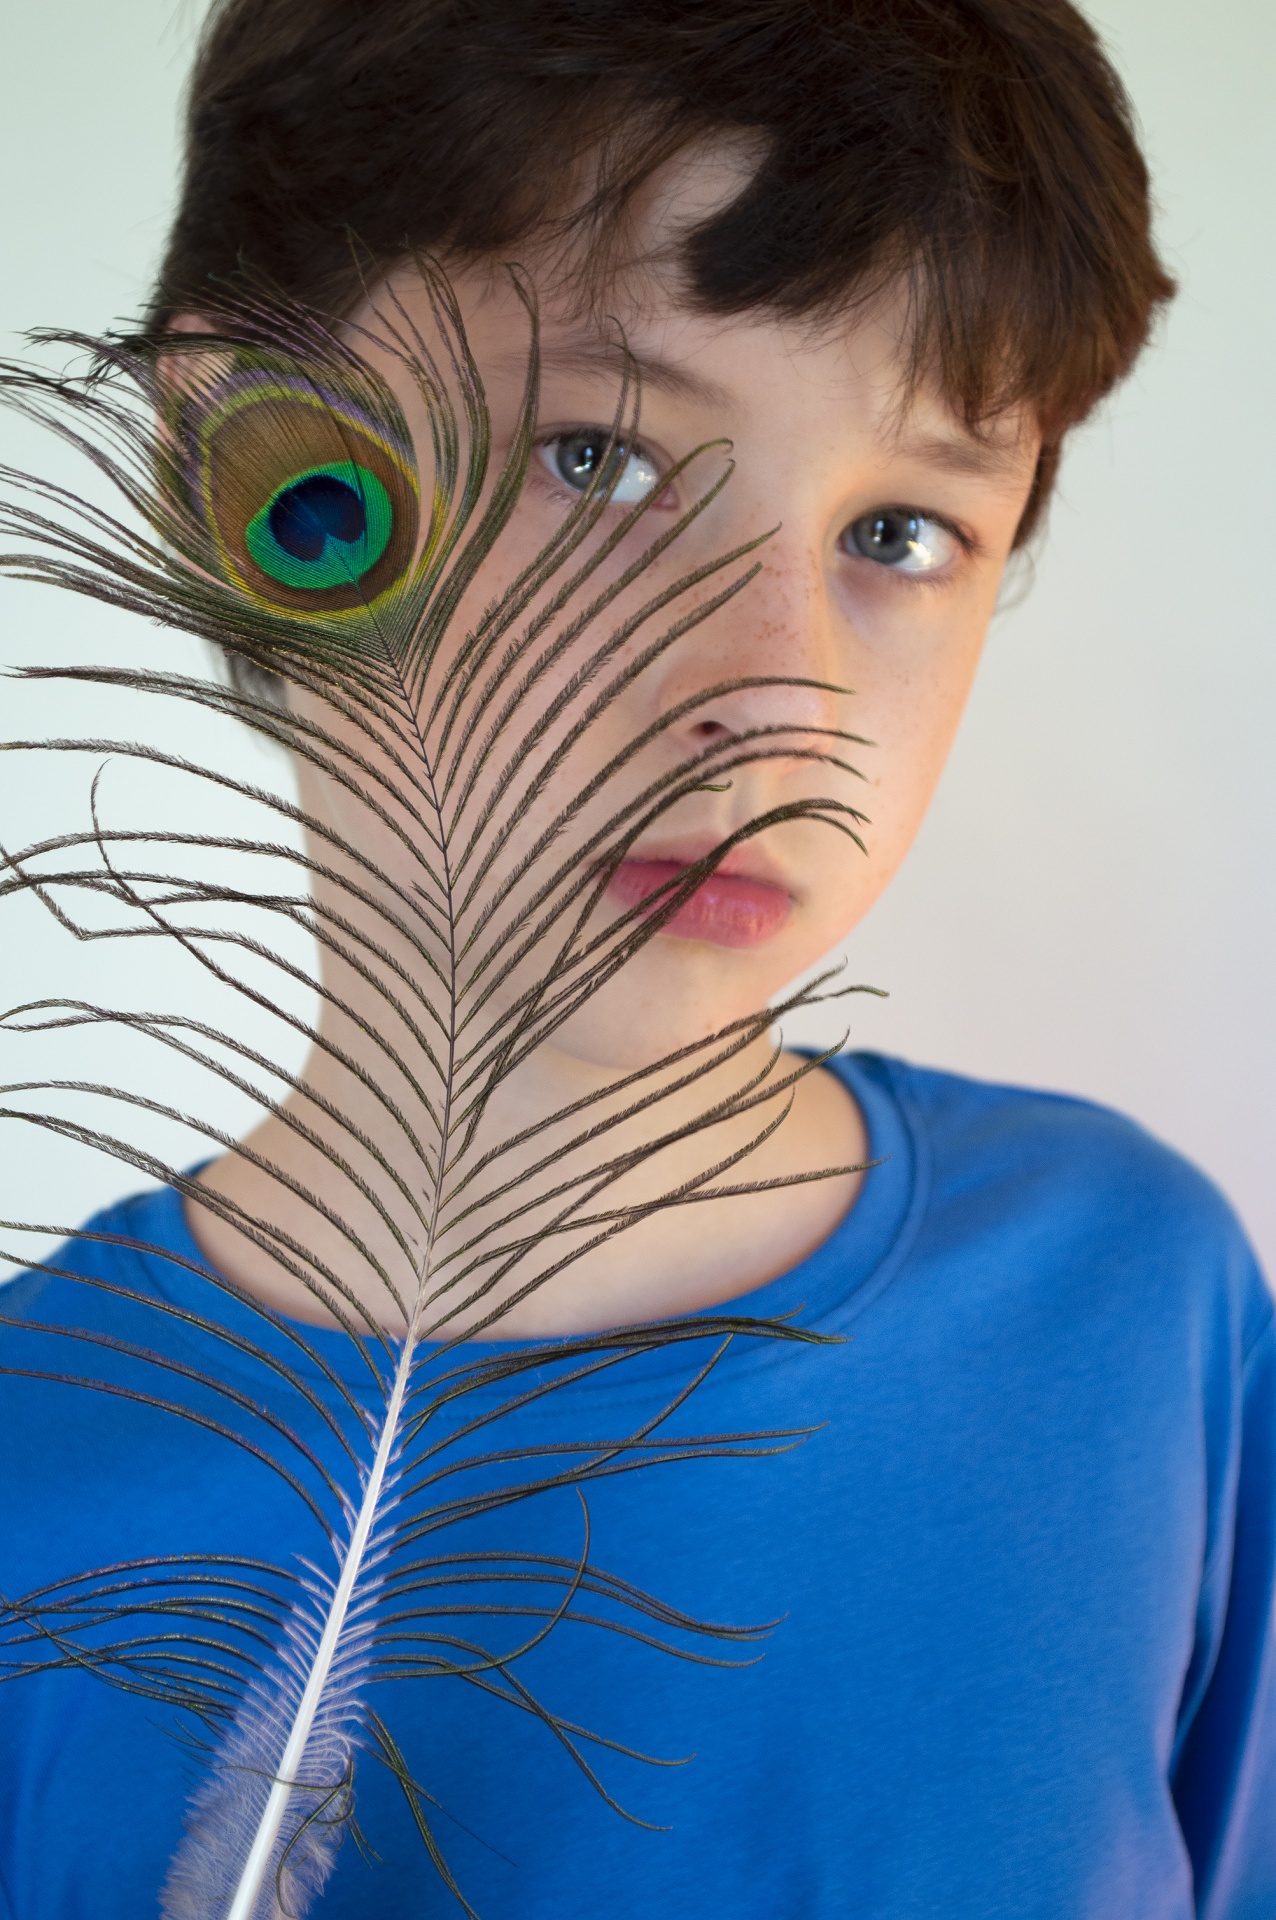 Portrait Of A Boy With A Peacock